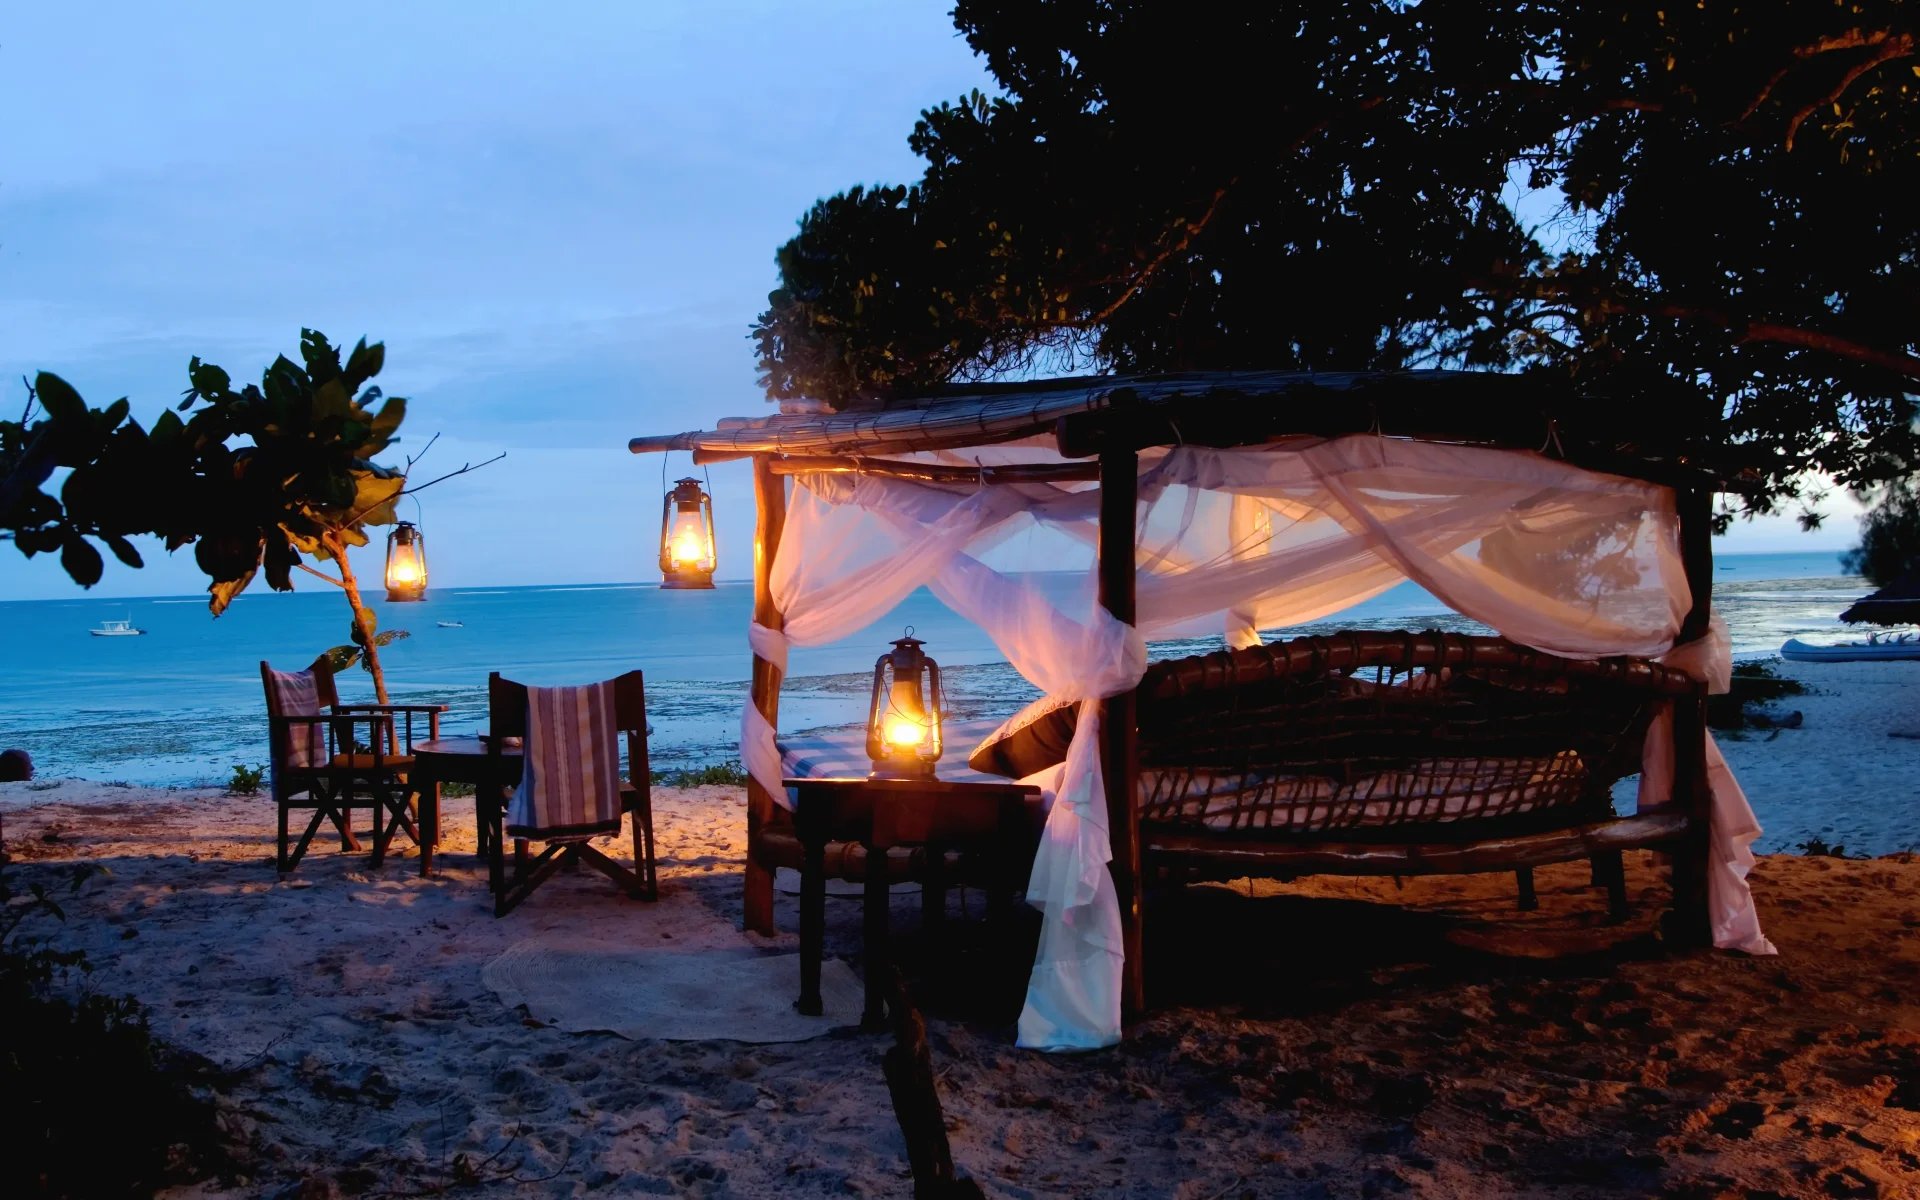 A cosy seating area is set up on the beach front at Kinondo Kwetu during the early evening. It is lit up by candlelight